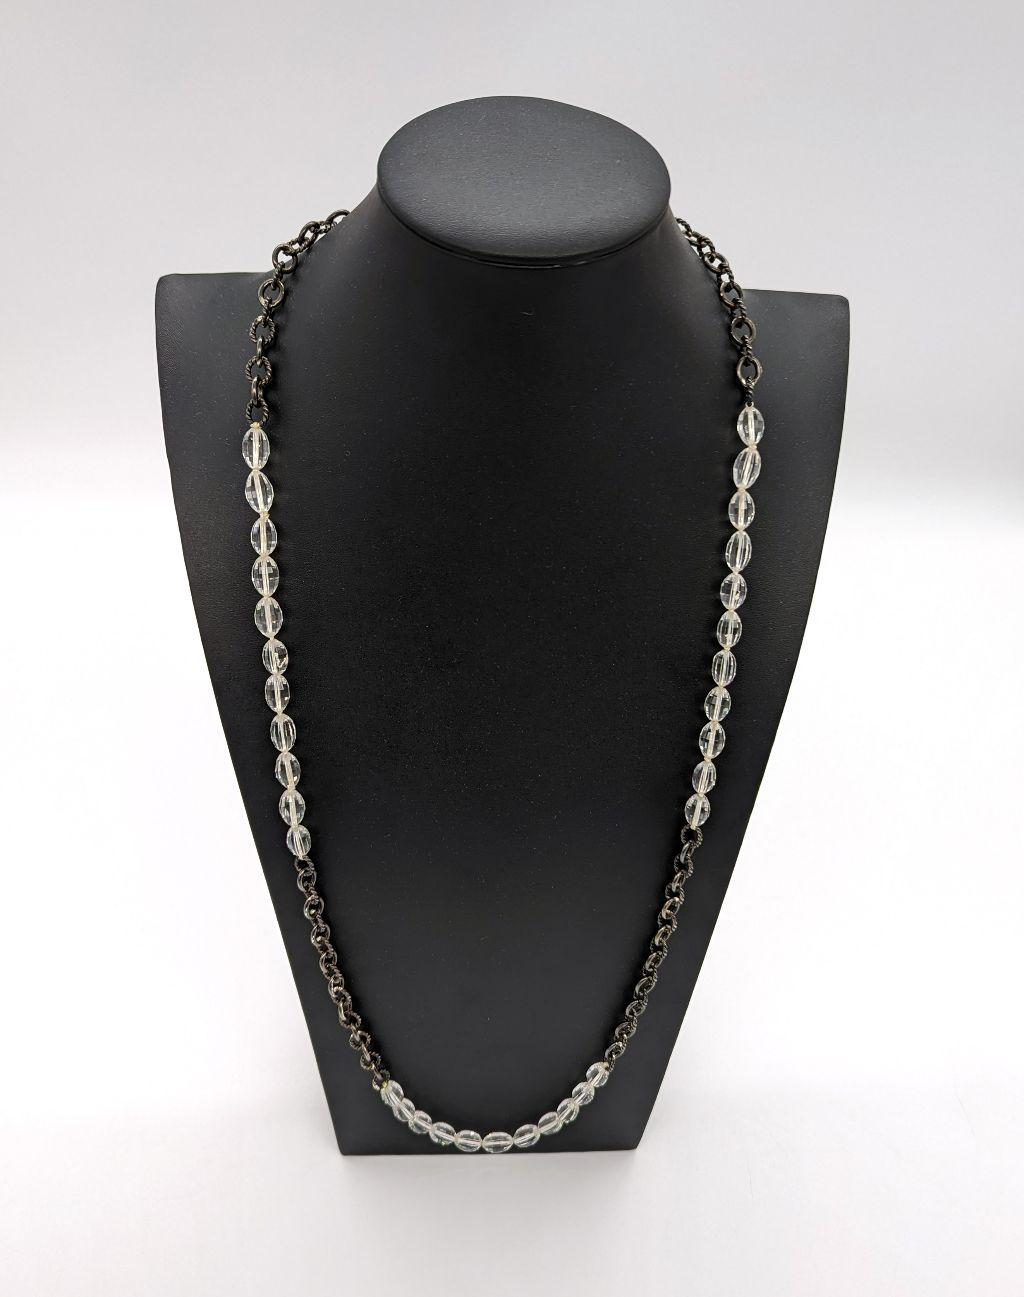 Oxidized Sterling Silver and Crystal Necklace Faith Shah